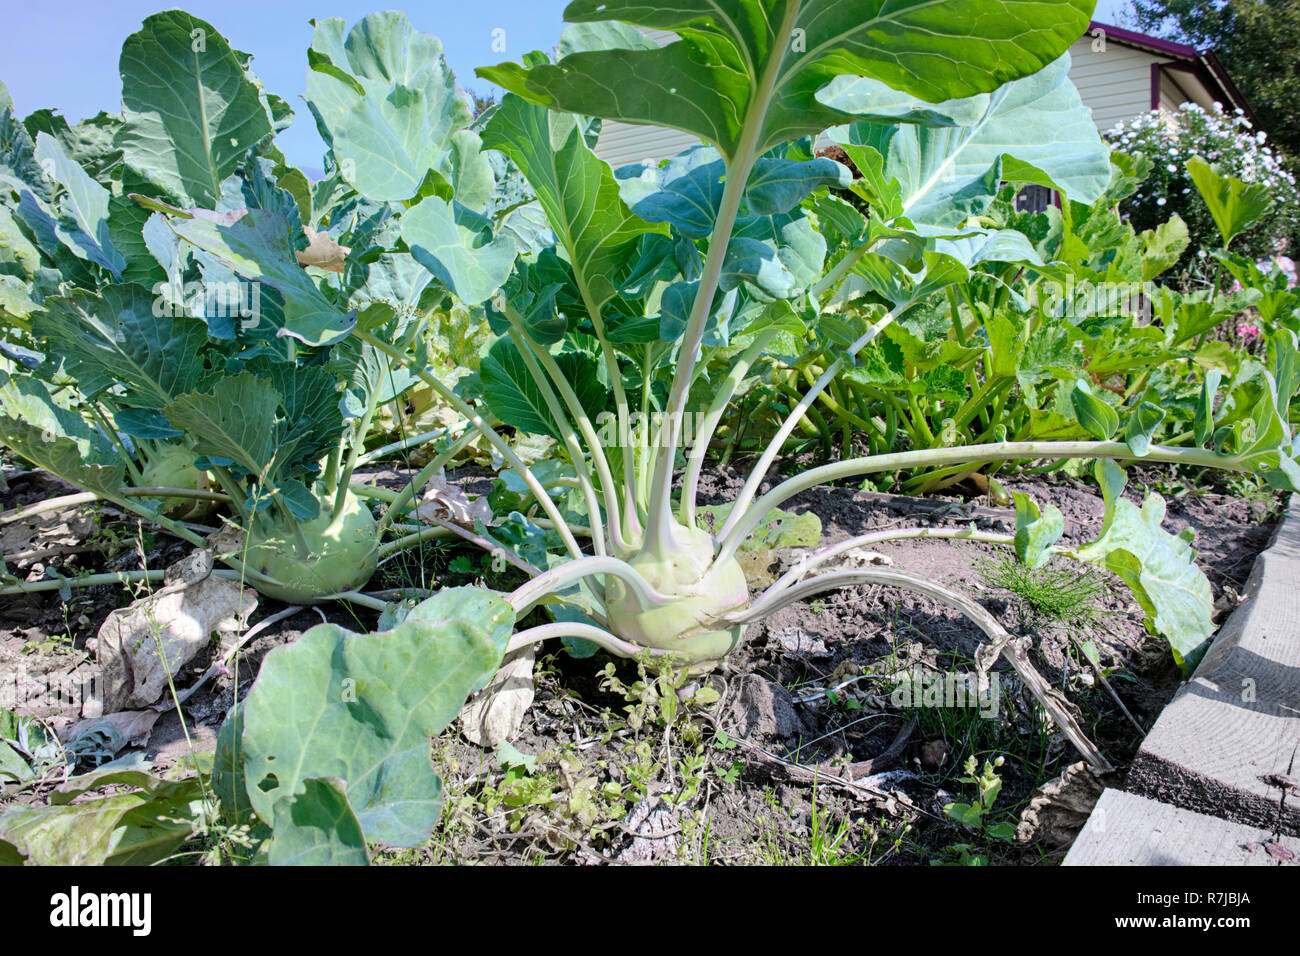 Kohlrabi mature Cabbage Grows in a Garden Bed Stock Photo